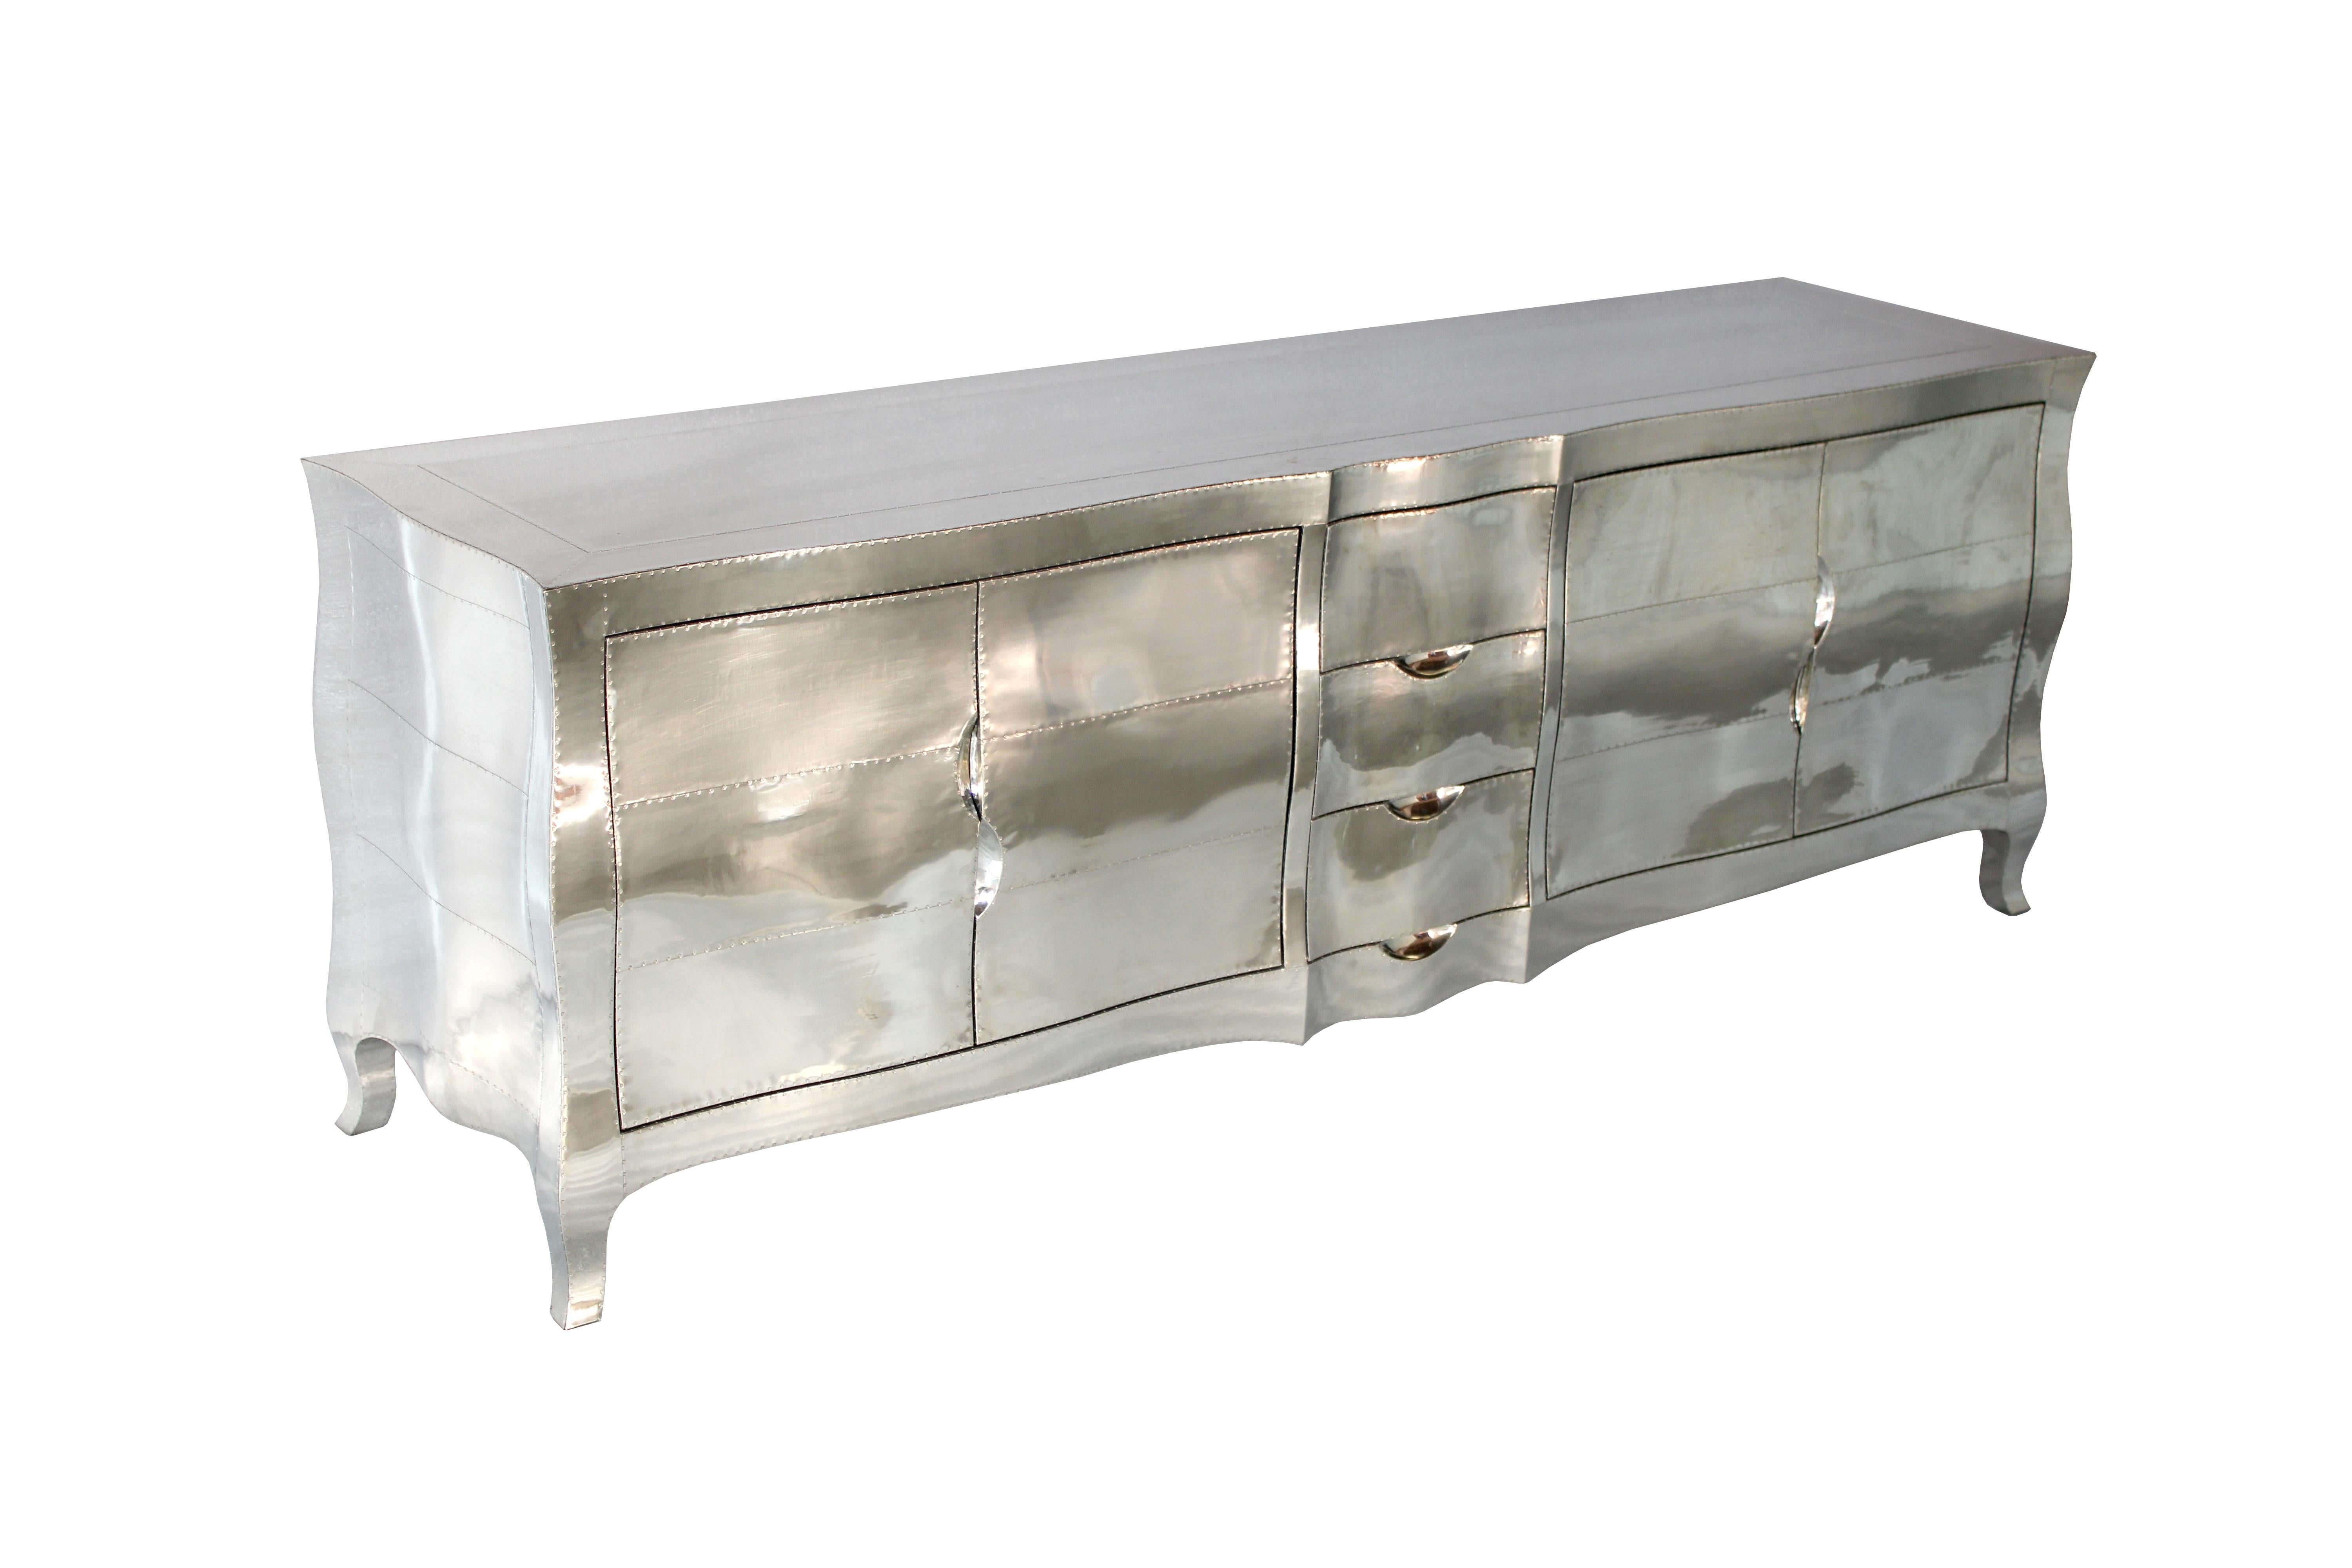 Contemporary Louis XV Credenza Dresser Sideboard Furniture in White Bronze by Paul Mathieu For Sale